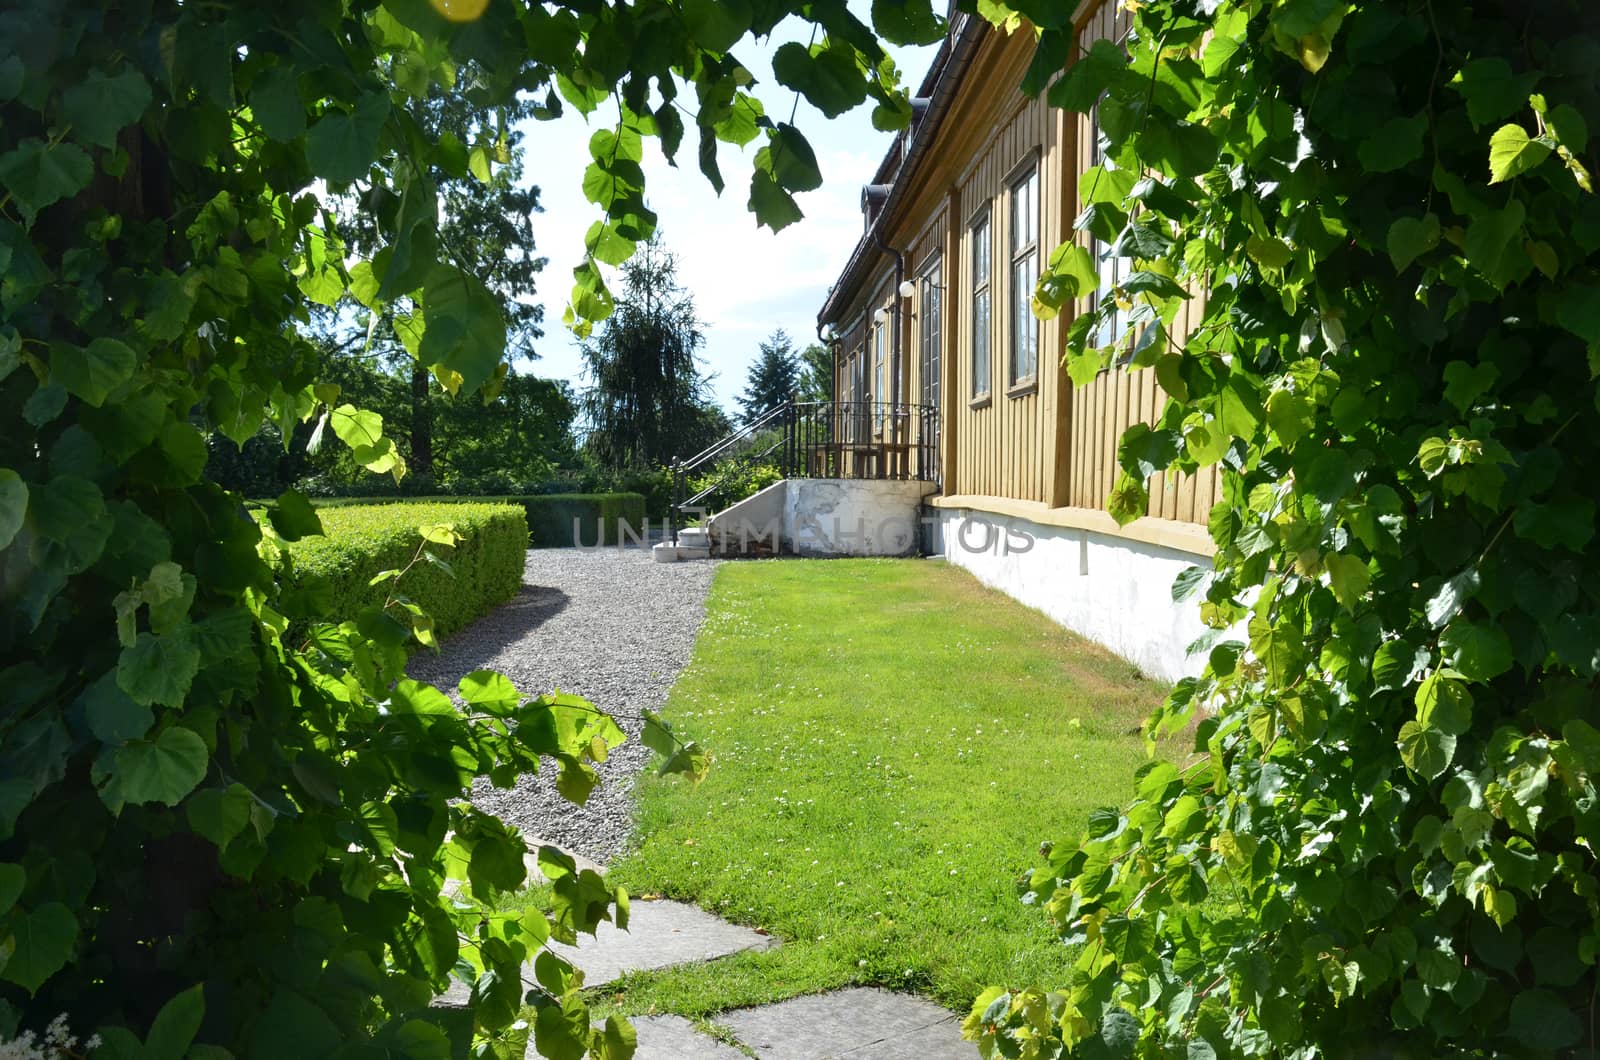 The University Botanical Garden at Tøyen in Oslo is Norway's oldest botanical garden, established in 1814. It is administrated by the University of Oslo. The University of Oslo's oldest building, the Tøyen Manor which was given as a gift in 1812, is located in the garden. The garden originally covered 75,000 square metres, but has since doubled in size. The collection includes roughly 35,000 plants of about 7500 unique species.